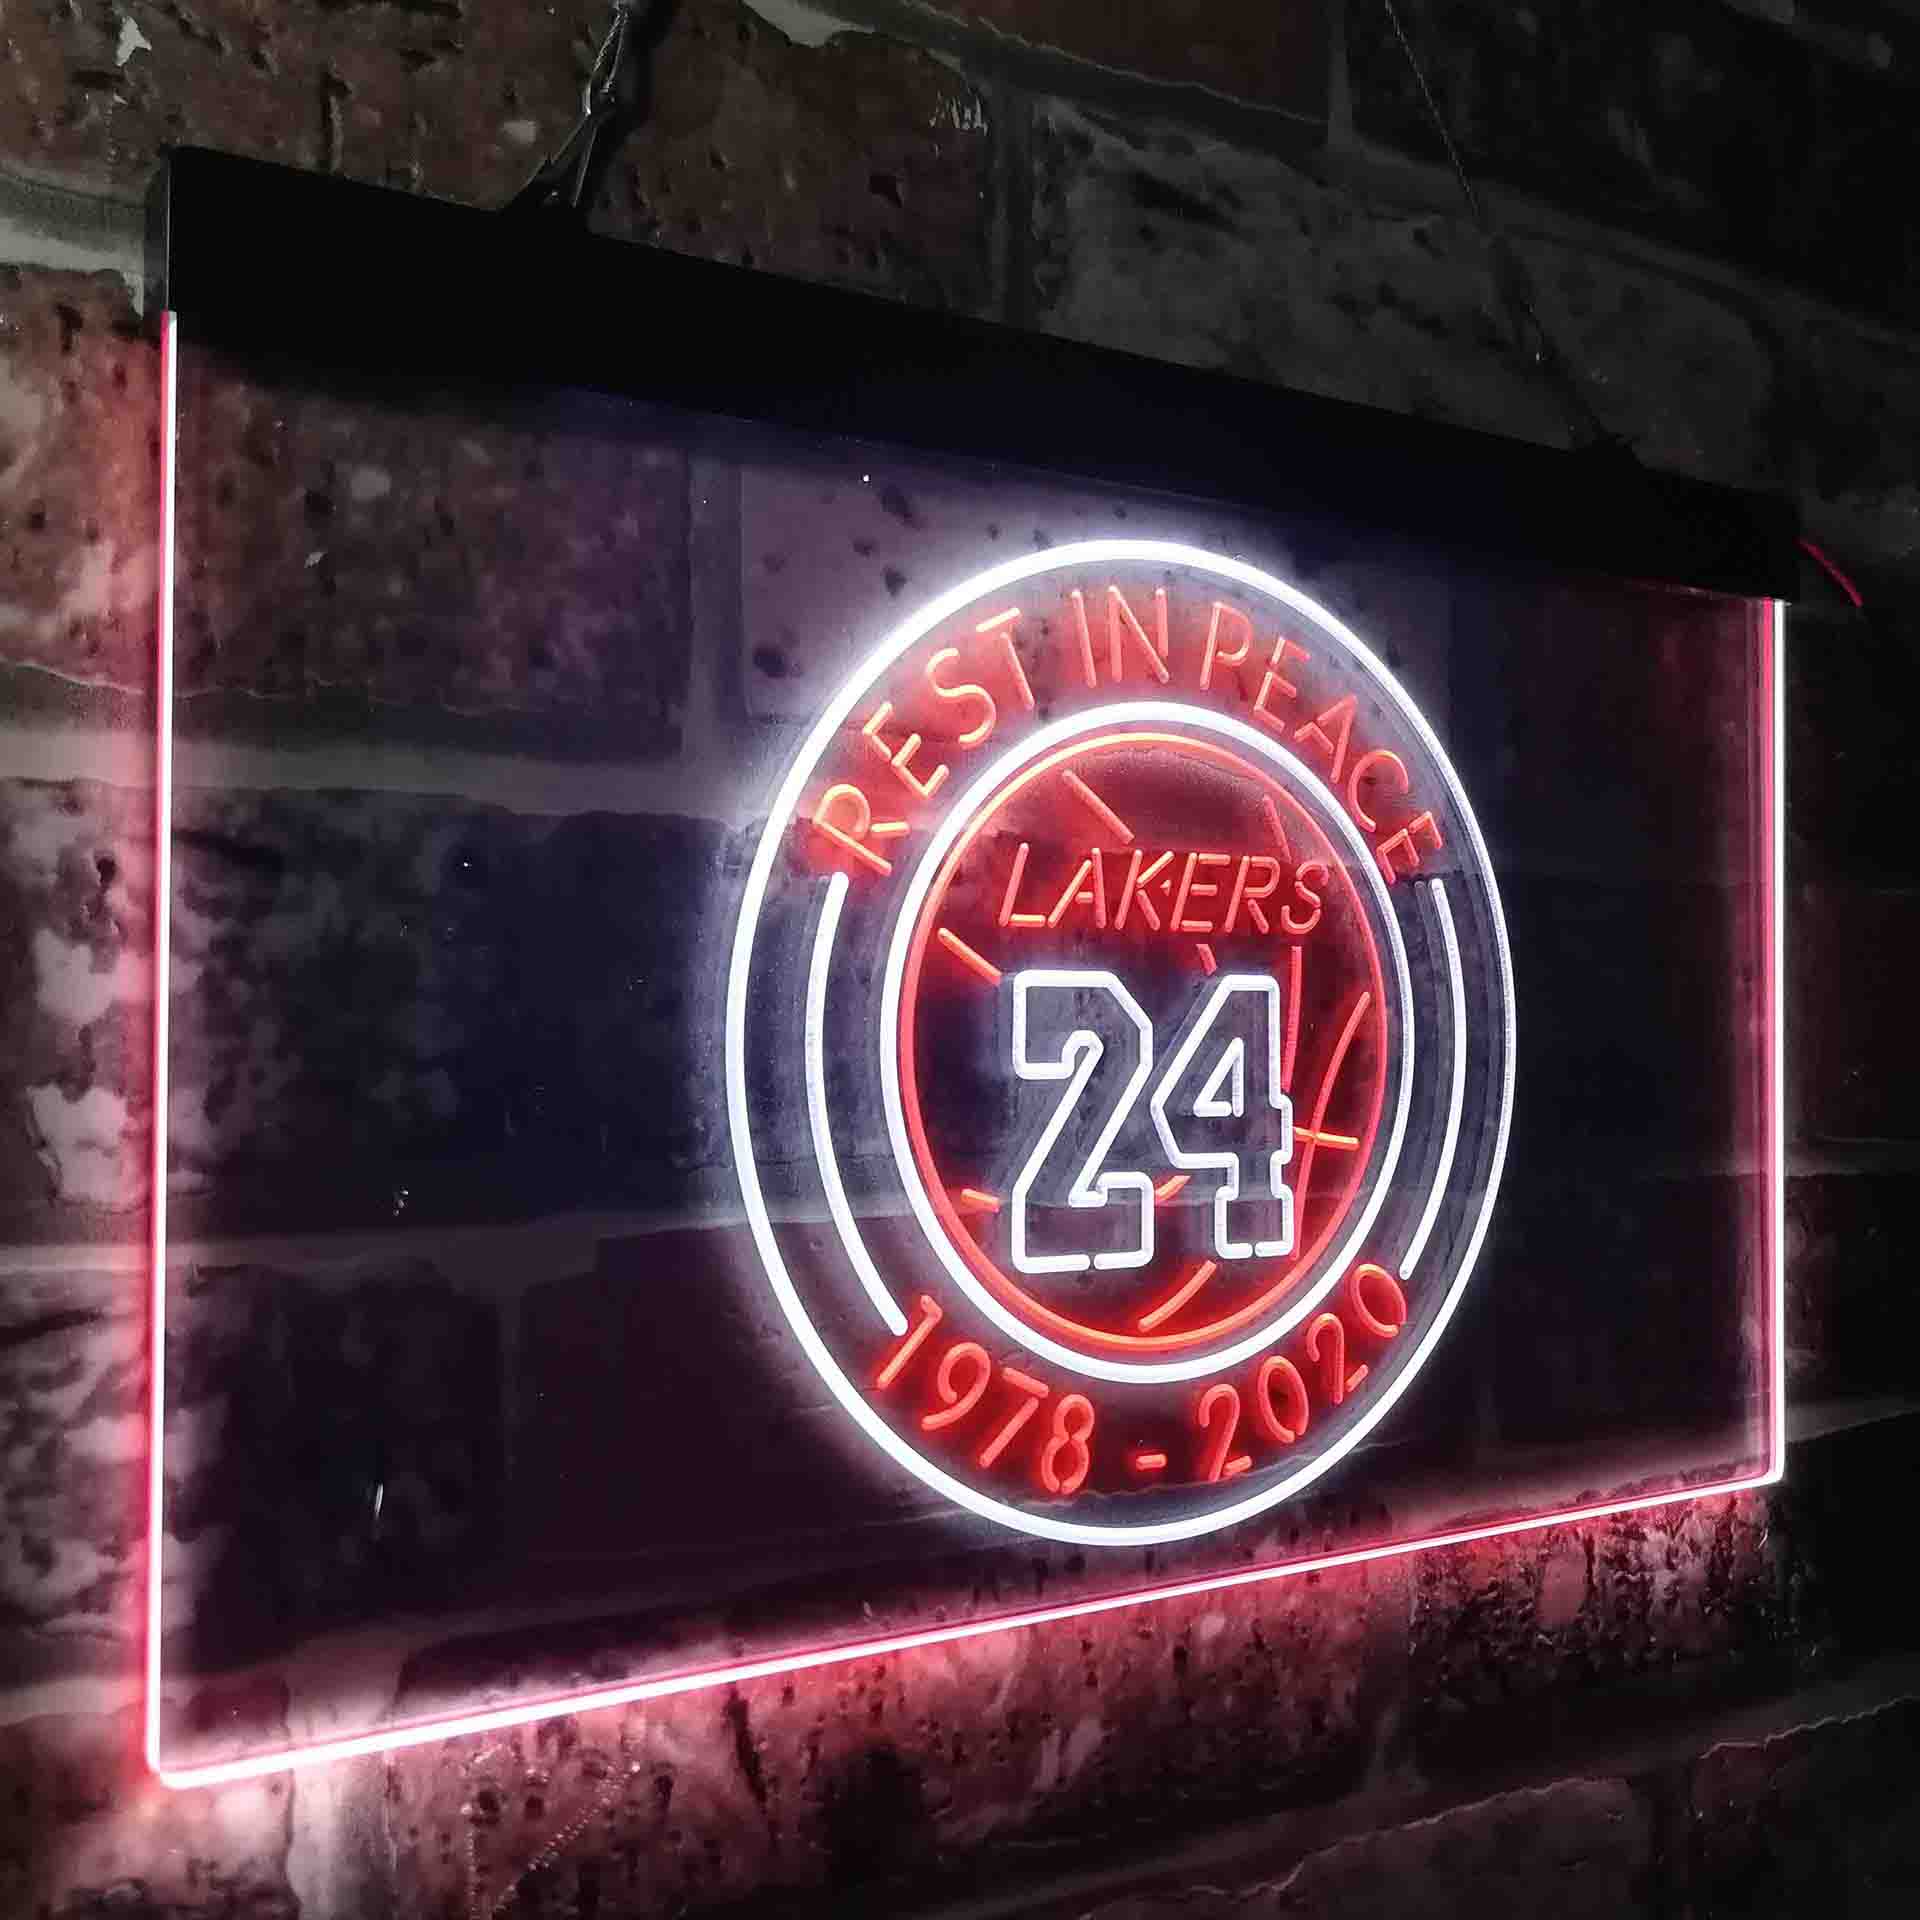 Lakers 24 Rest in Peach 1978-2020 Basketball LED Neon Sign